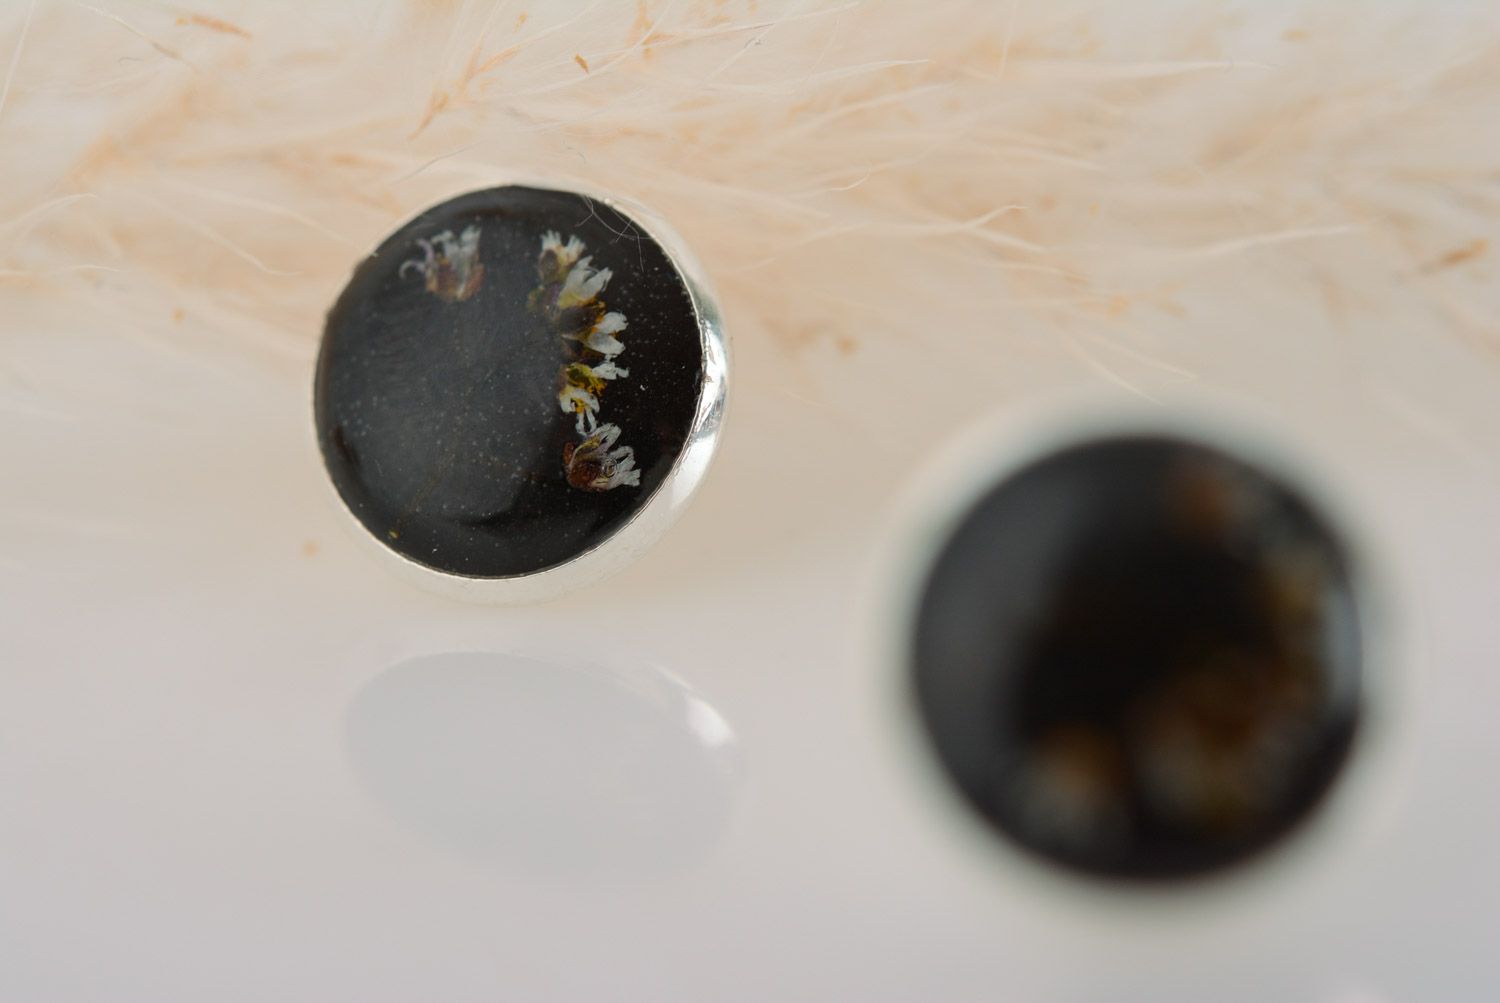 Homemade small black stud earrings with dried flower embedded in epoxy resin photo 4